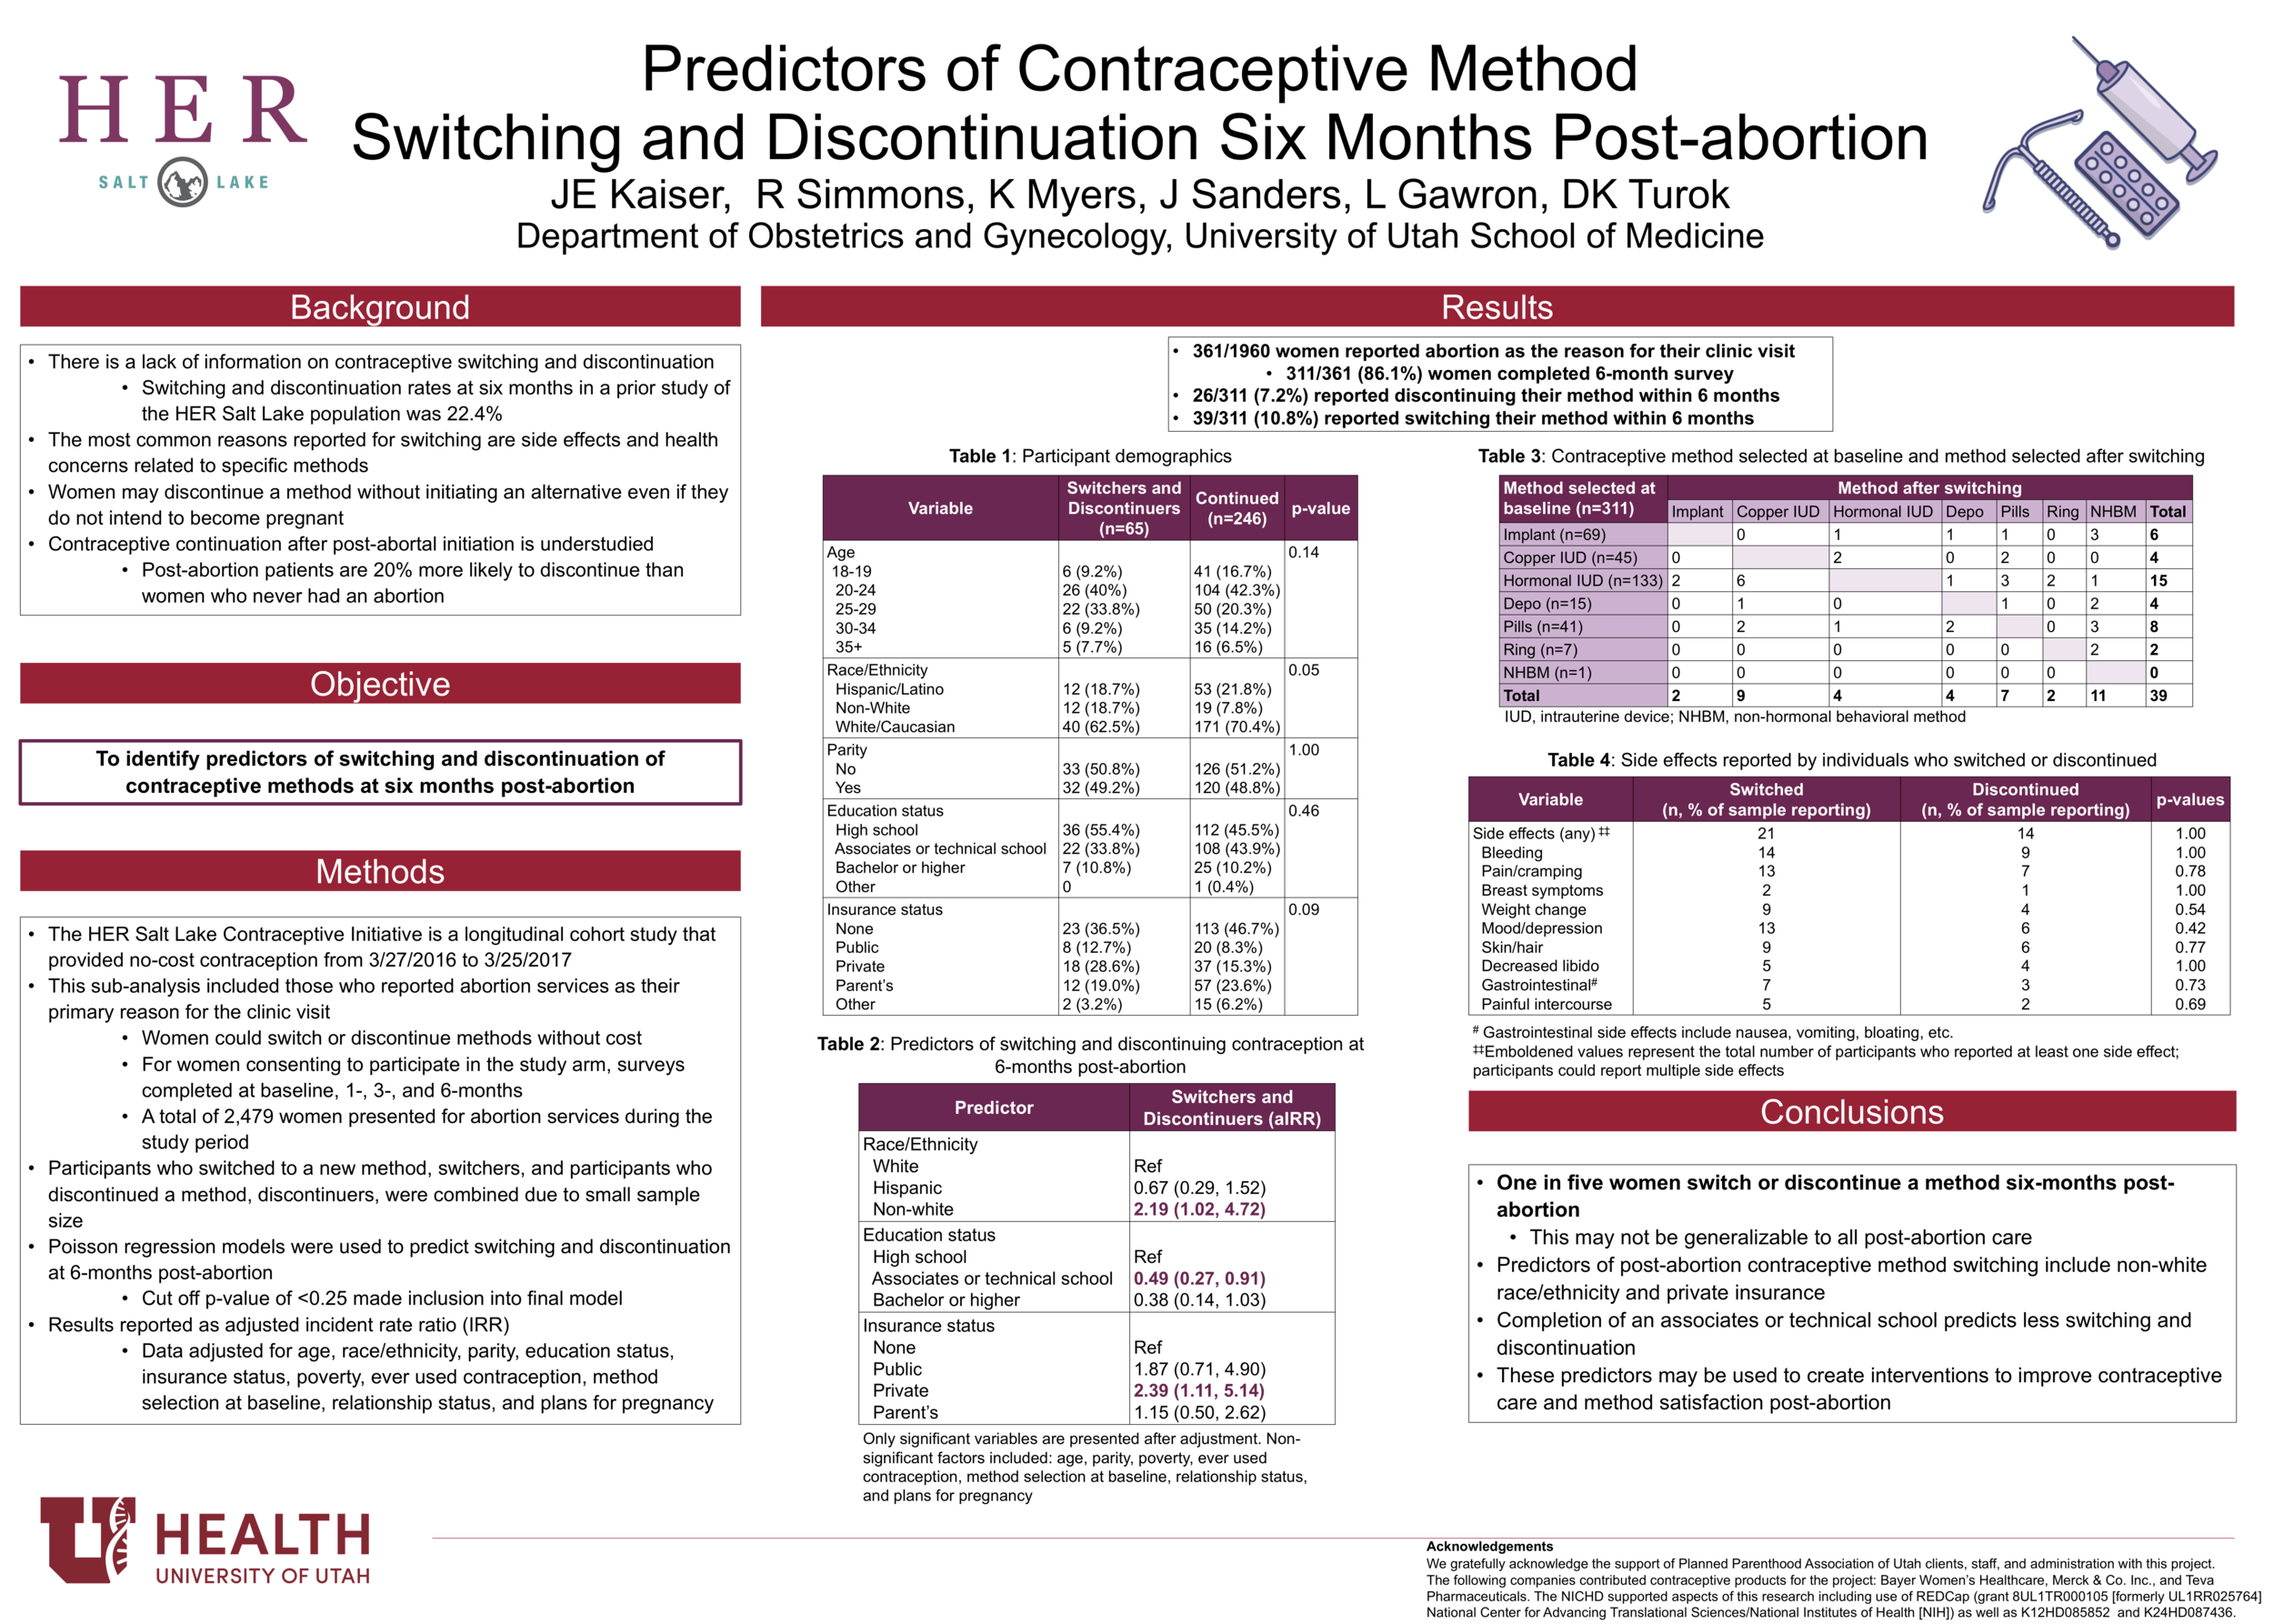 Predictors of Contraceptive Method Switching and Discontinuation Six Months Post-abortion.